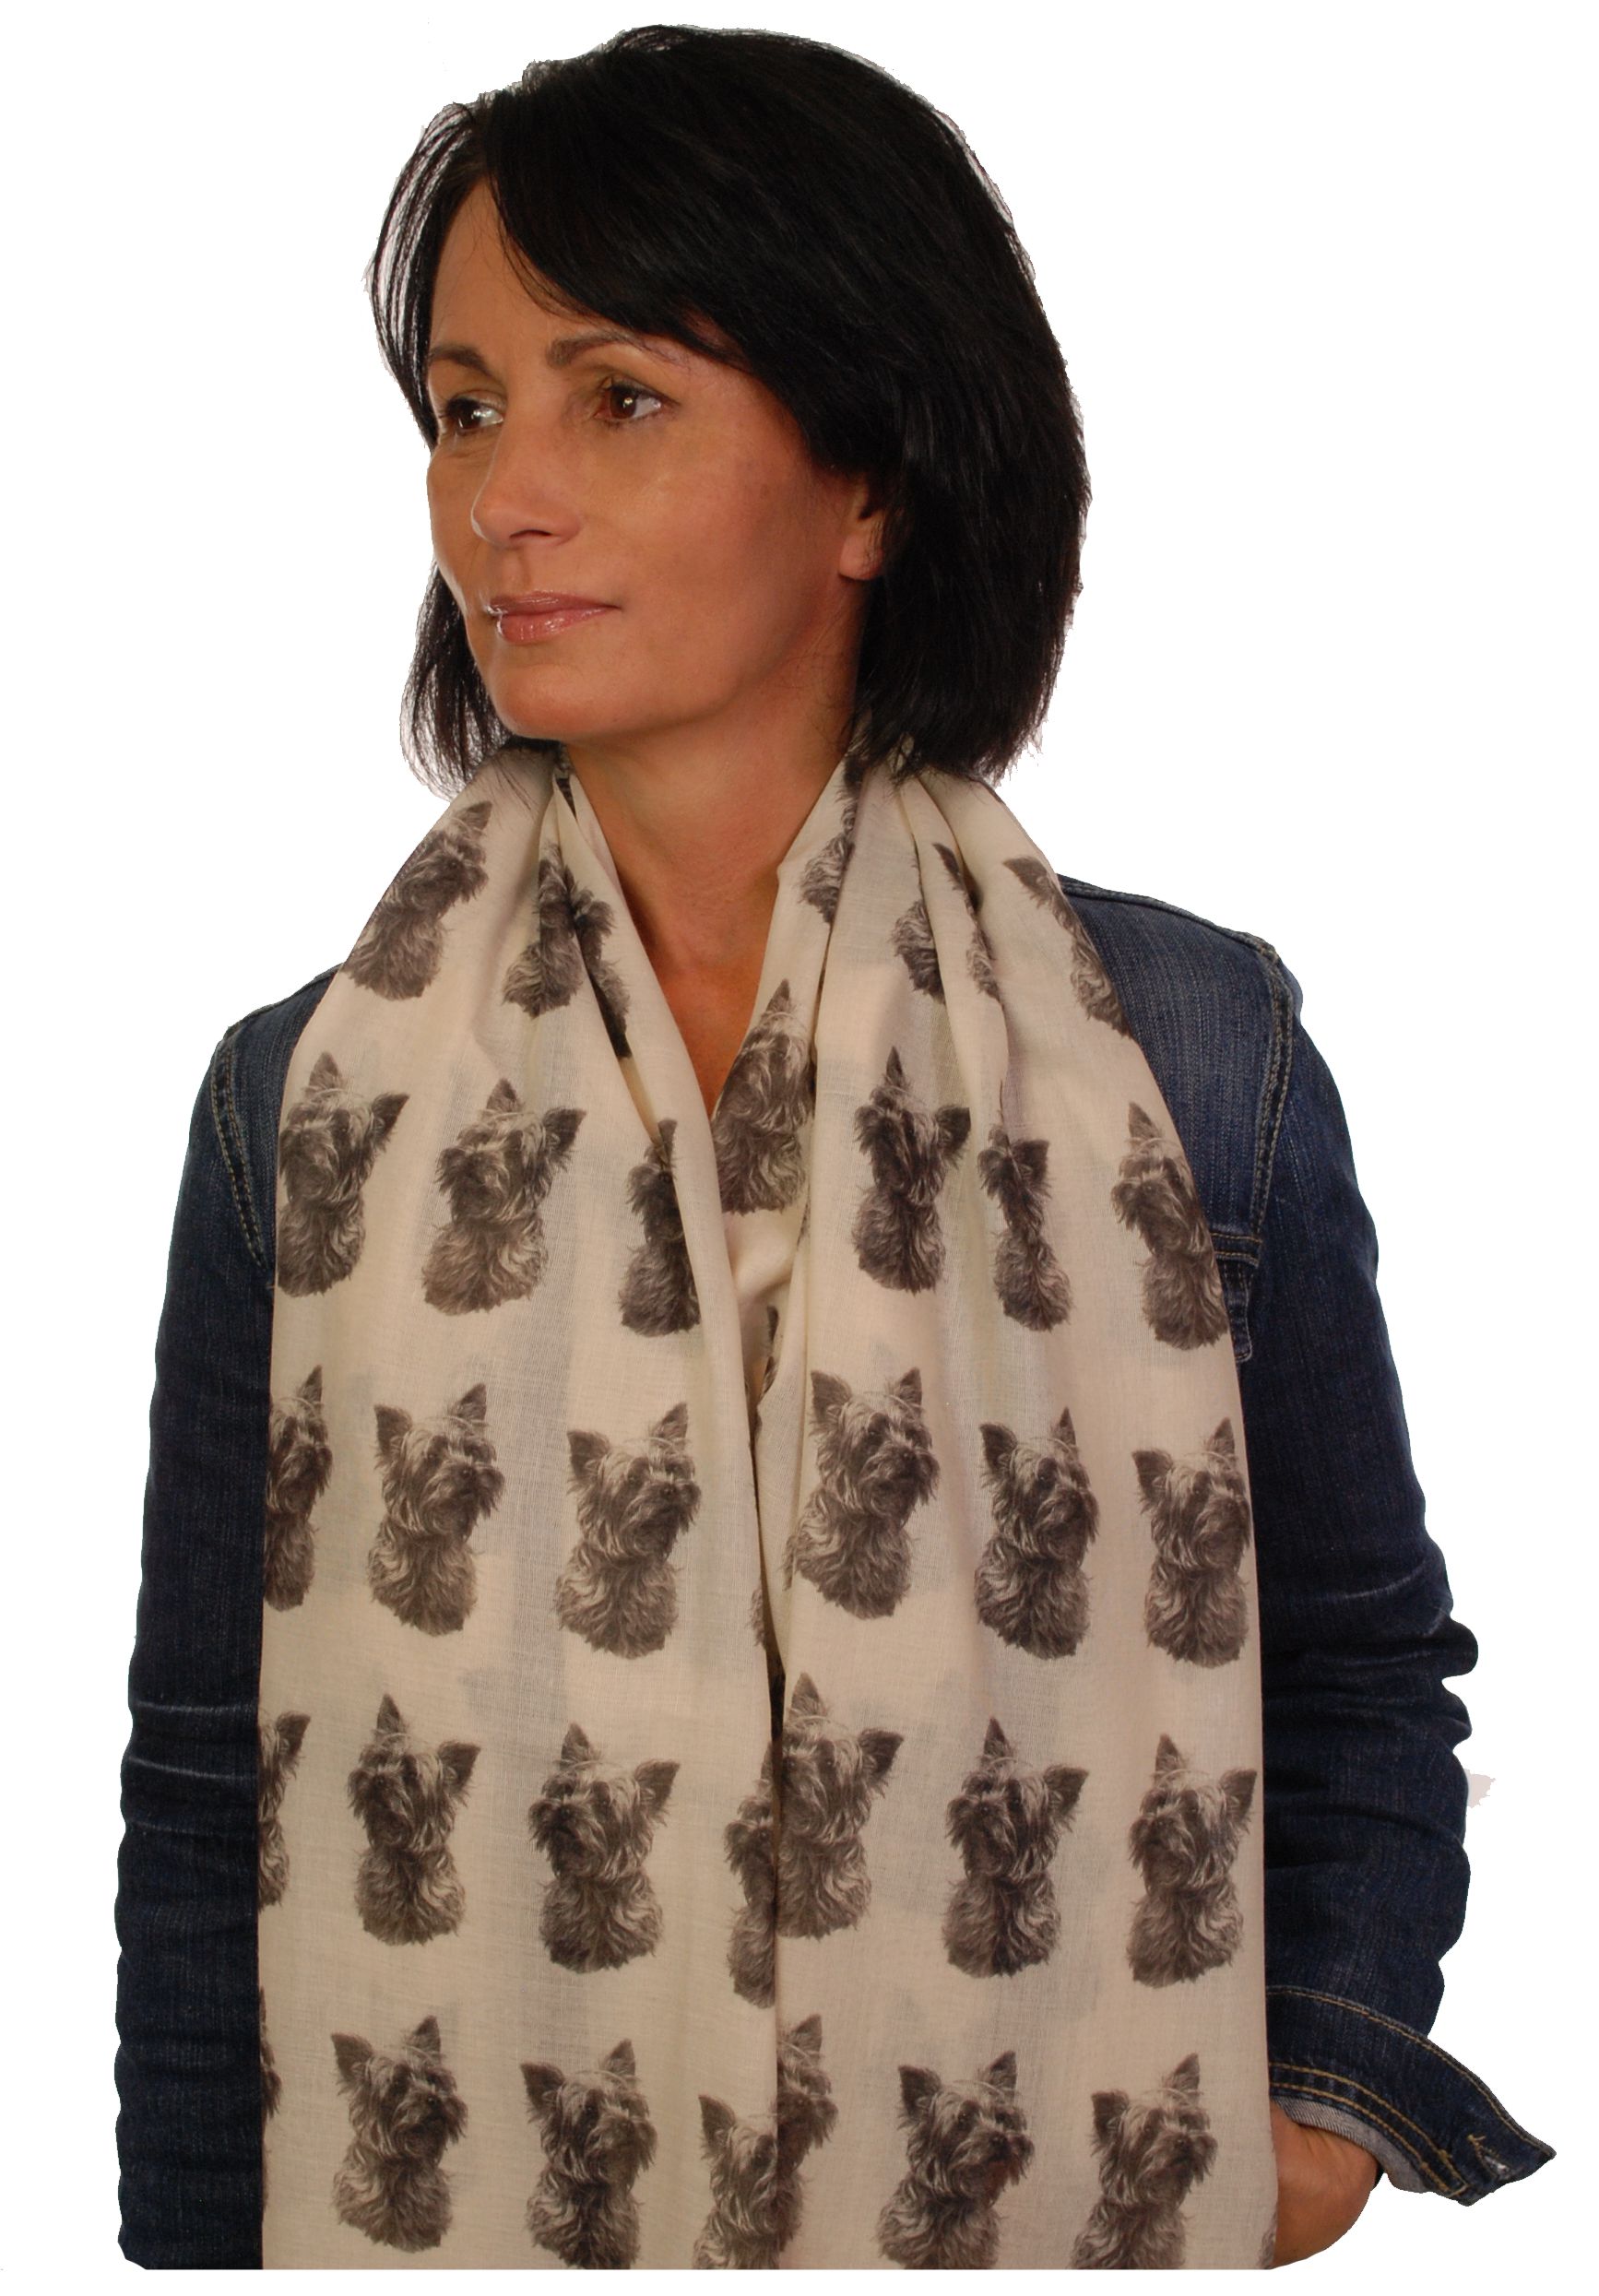 Mike Sibley Yorkshire Terrier licensed design ladies fashion scarf